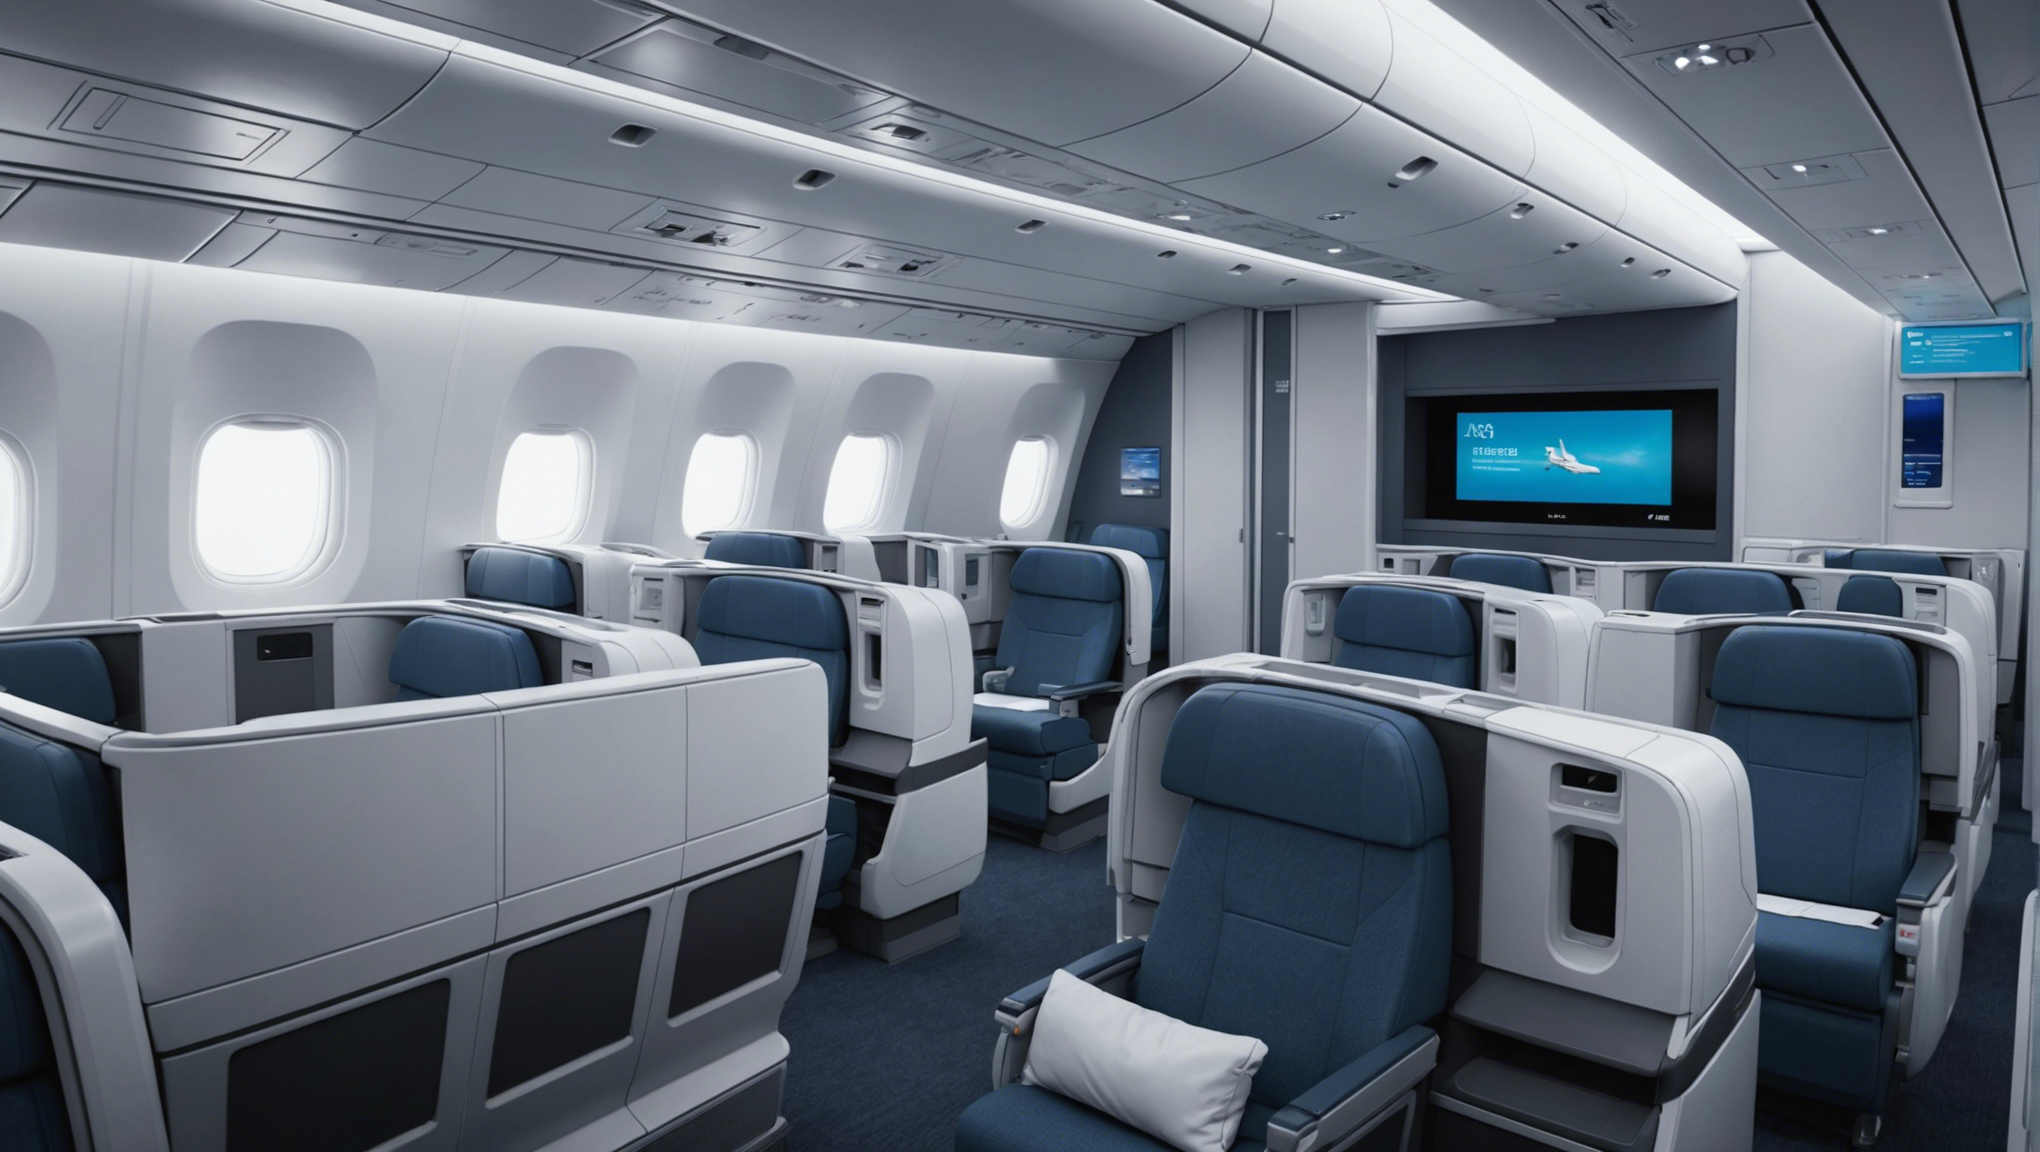 discover the intelligent windows of the all-new "airspace" cabin on the a330neo, offering an unrivalled flying experience.